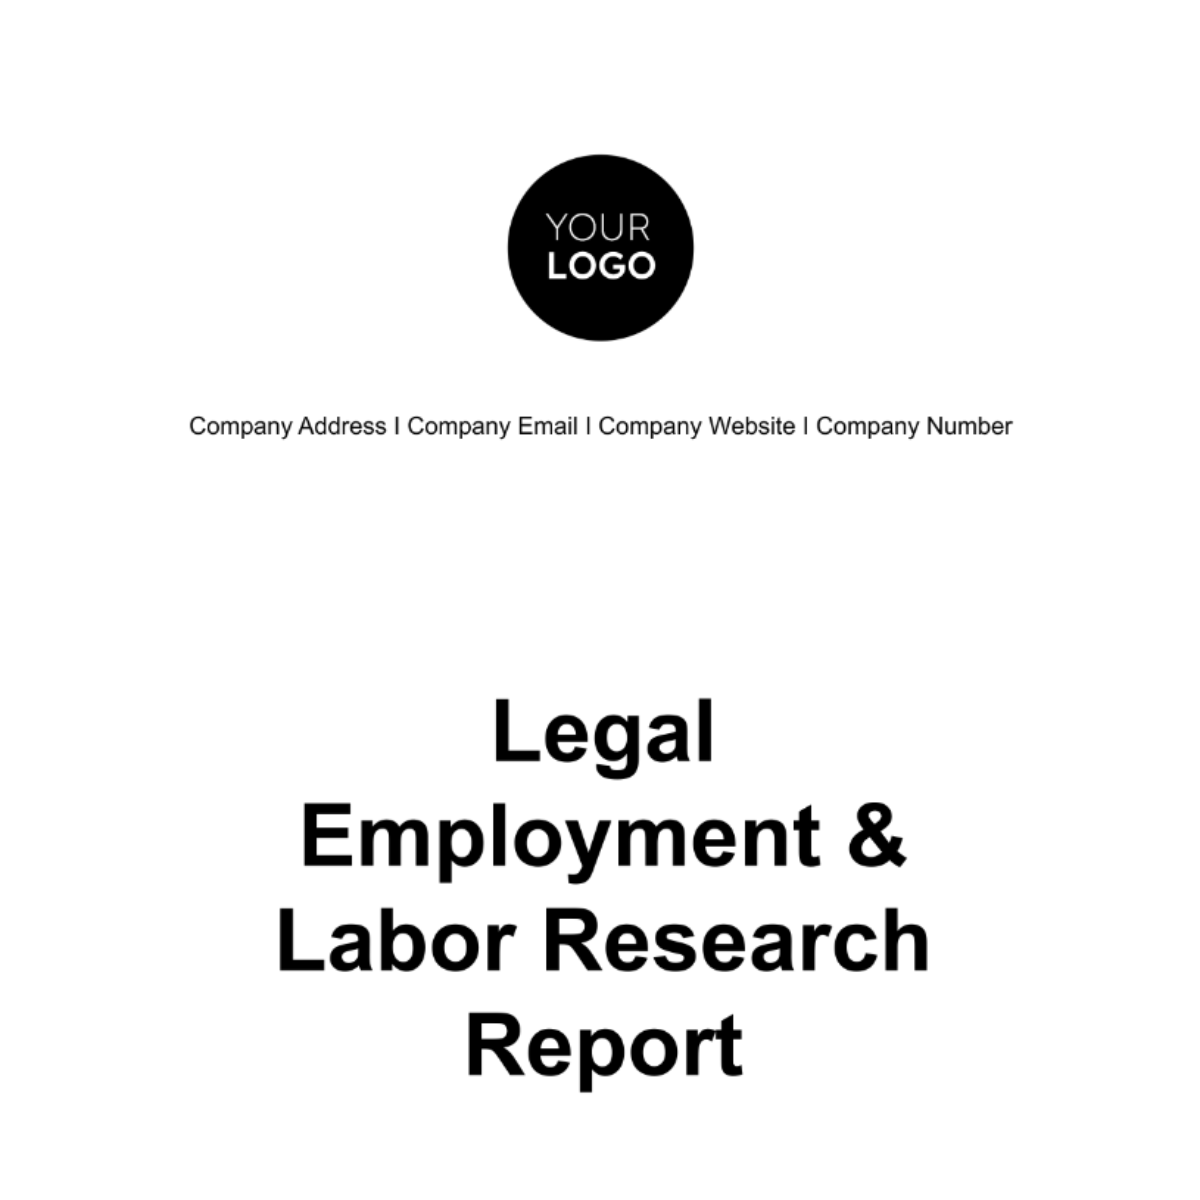 Legal Employment & Labor Research Report Template